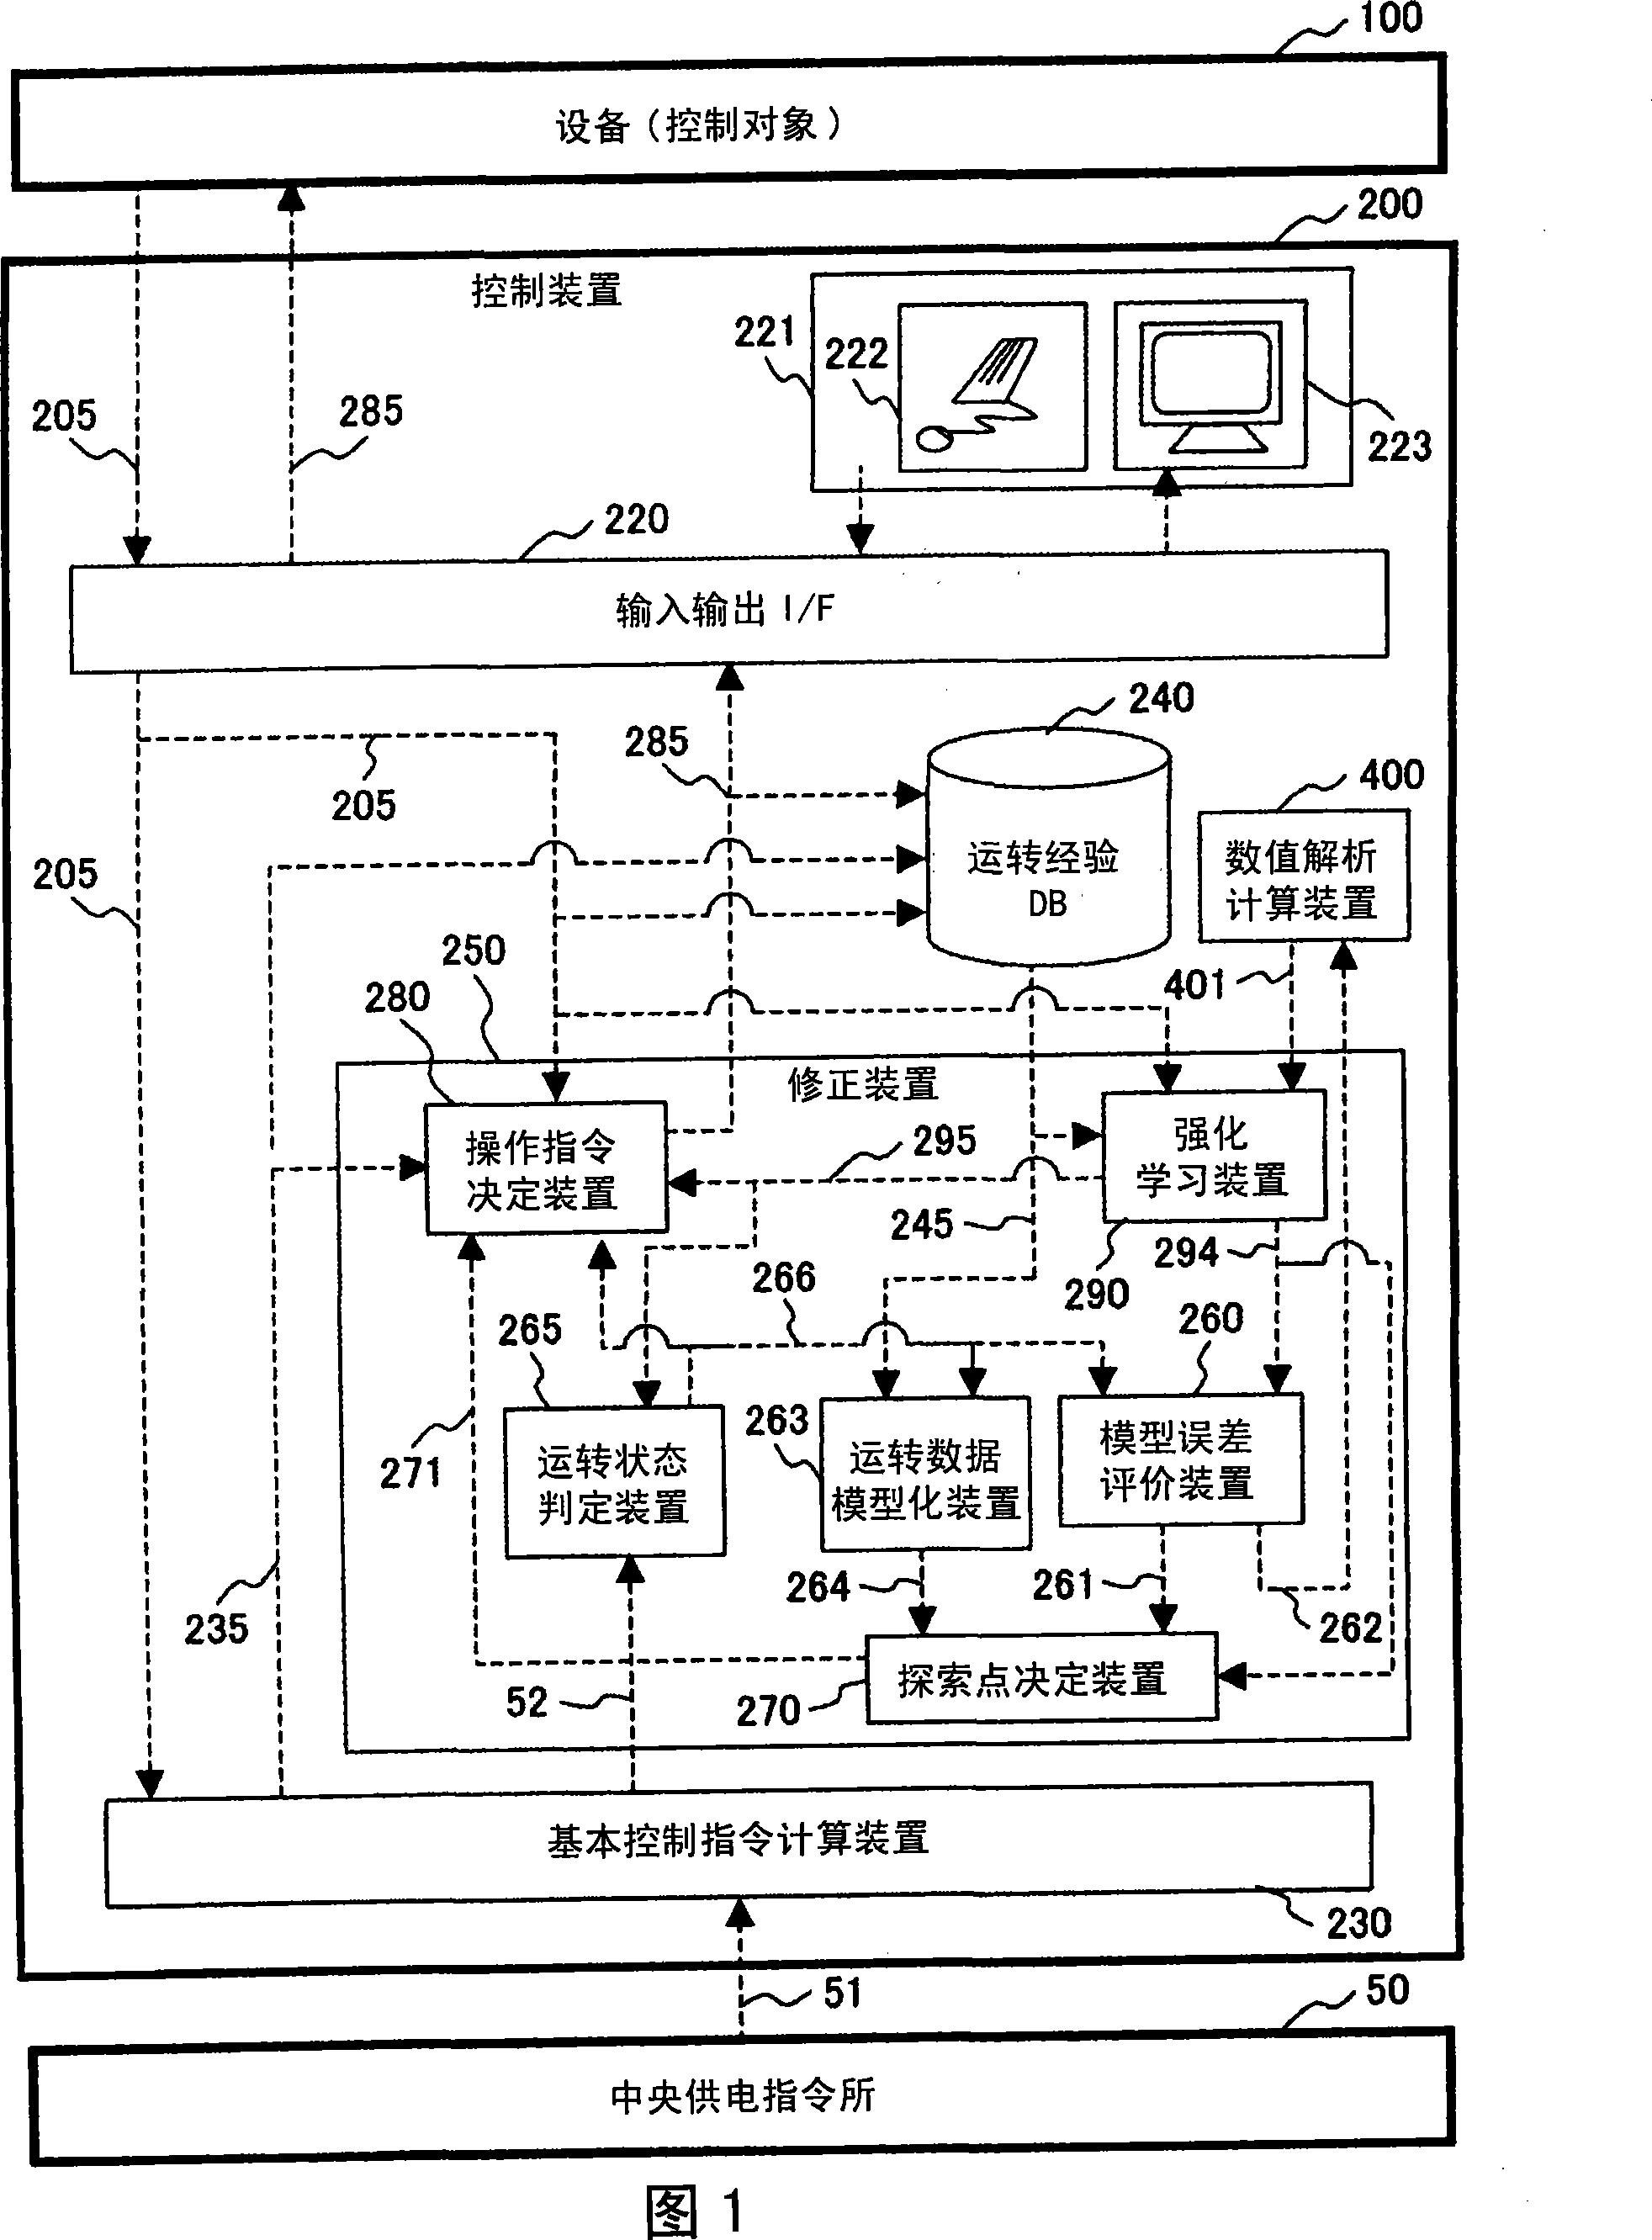 Control device for boiler equipment and gas concentration concluding apparatus